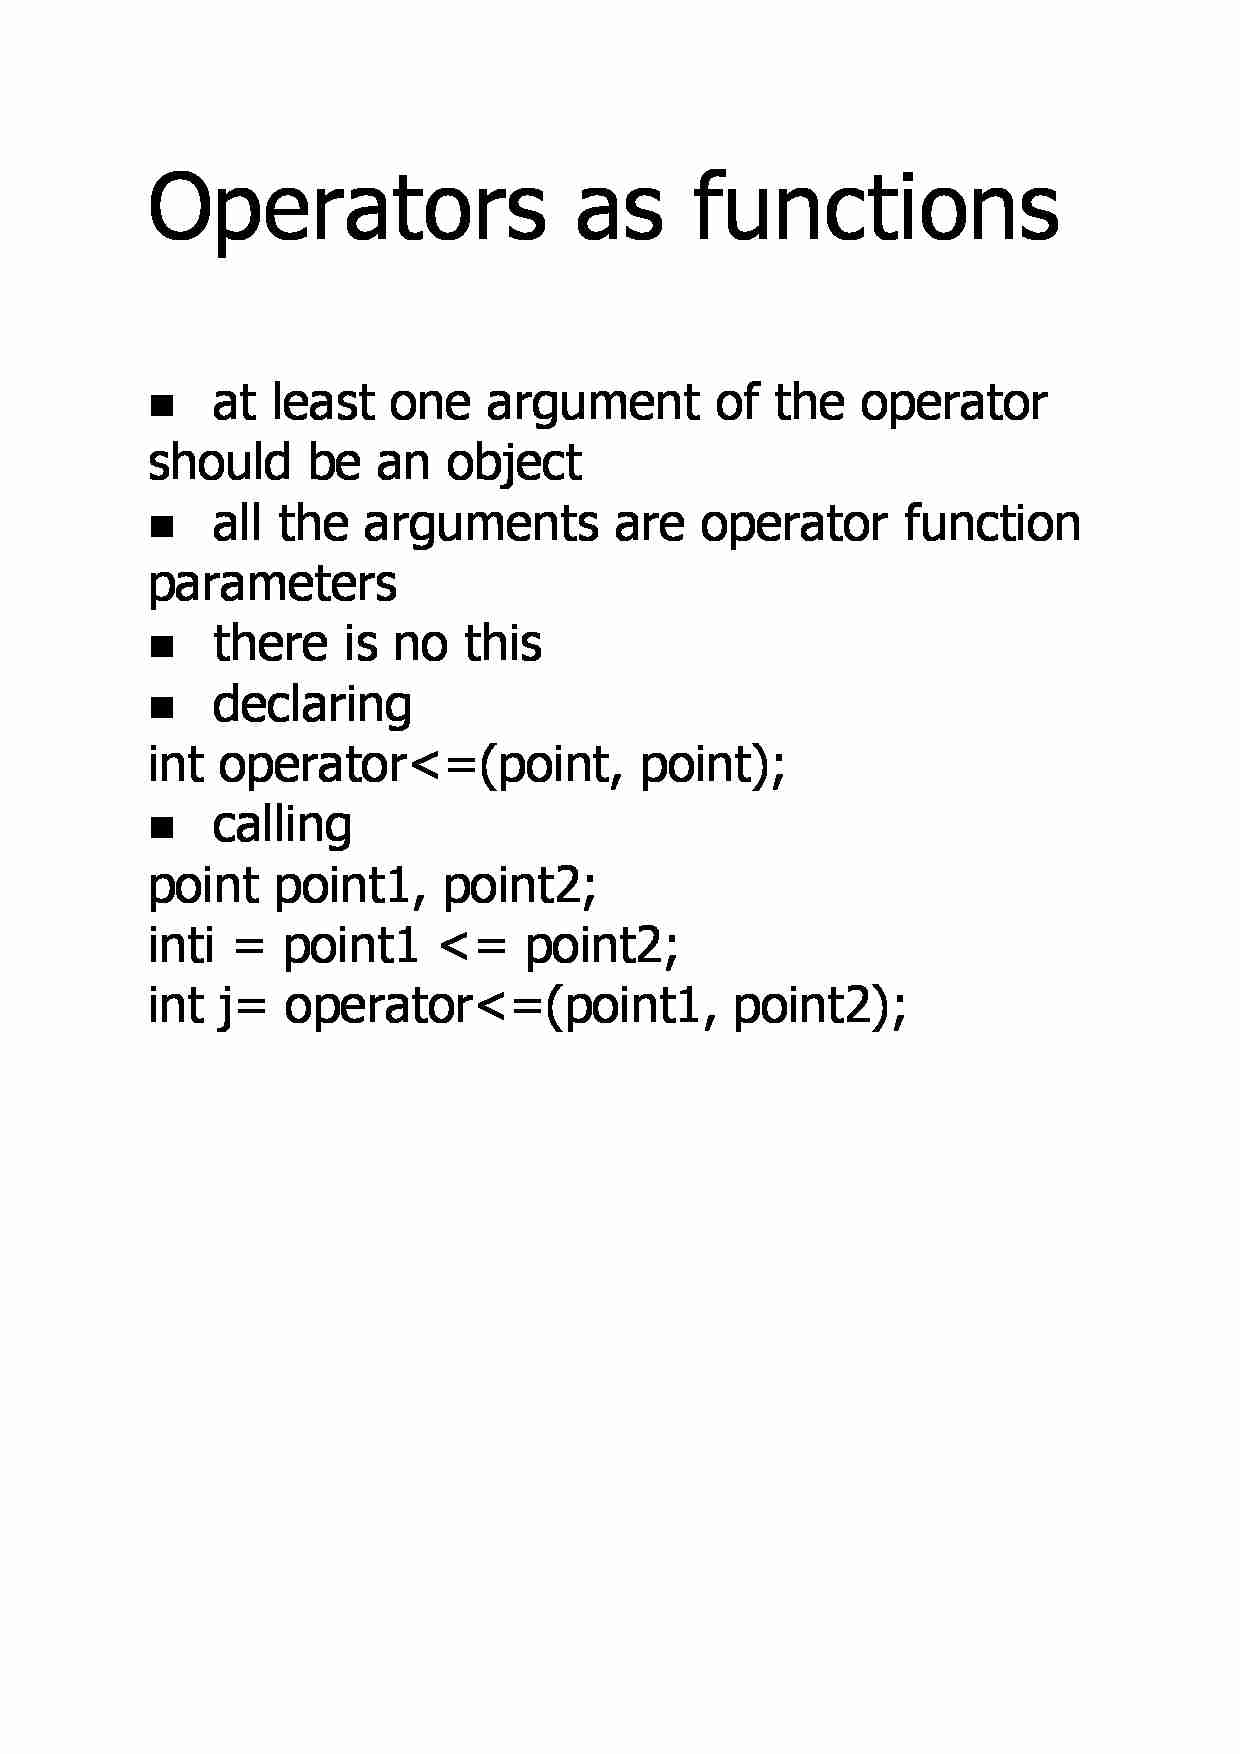 Operators as functions - strona 1